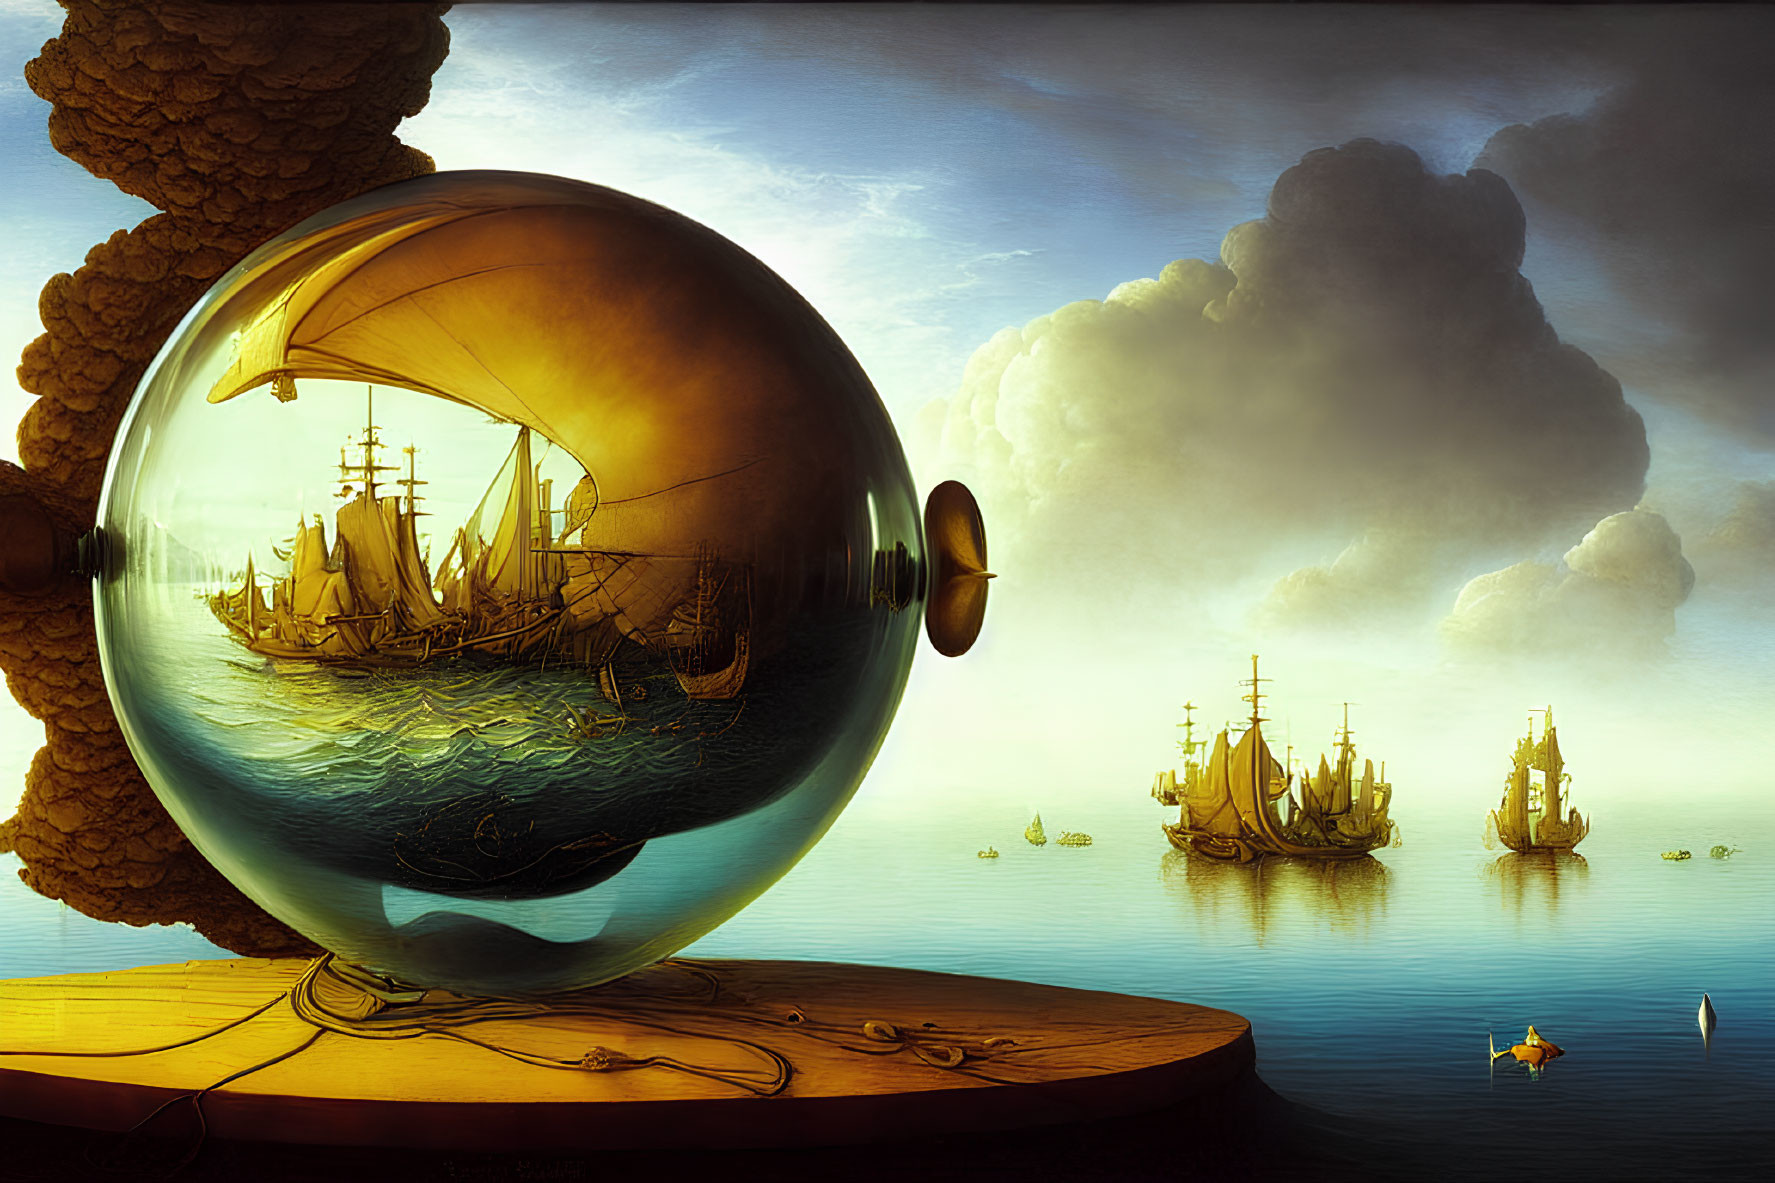 Surreal image of ships in water-filled globe and on sea under dramatic sky